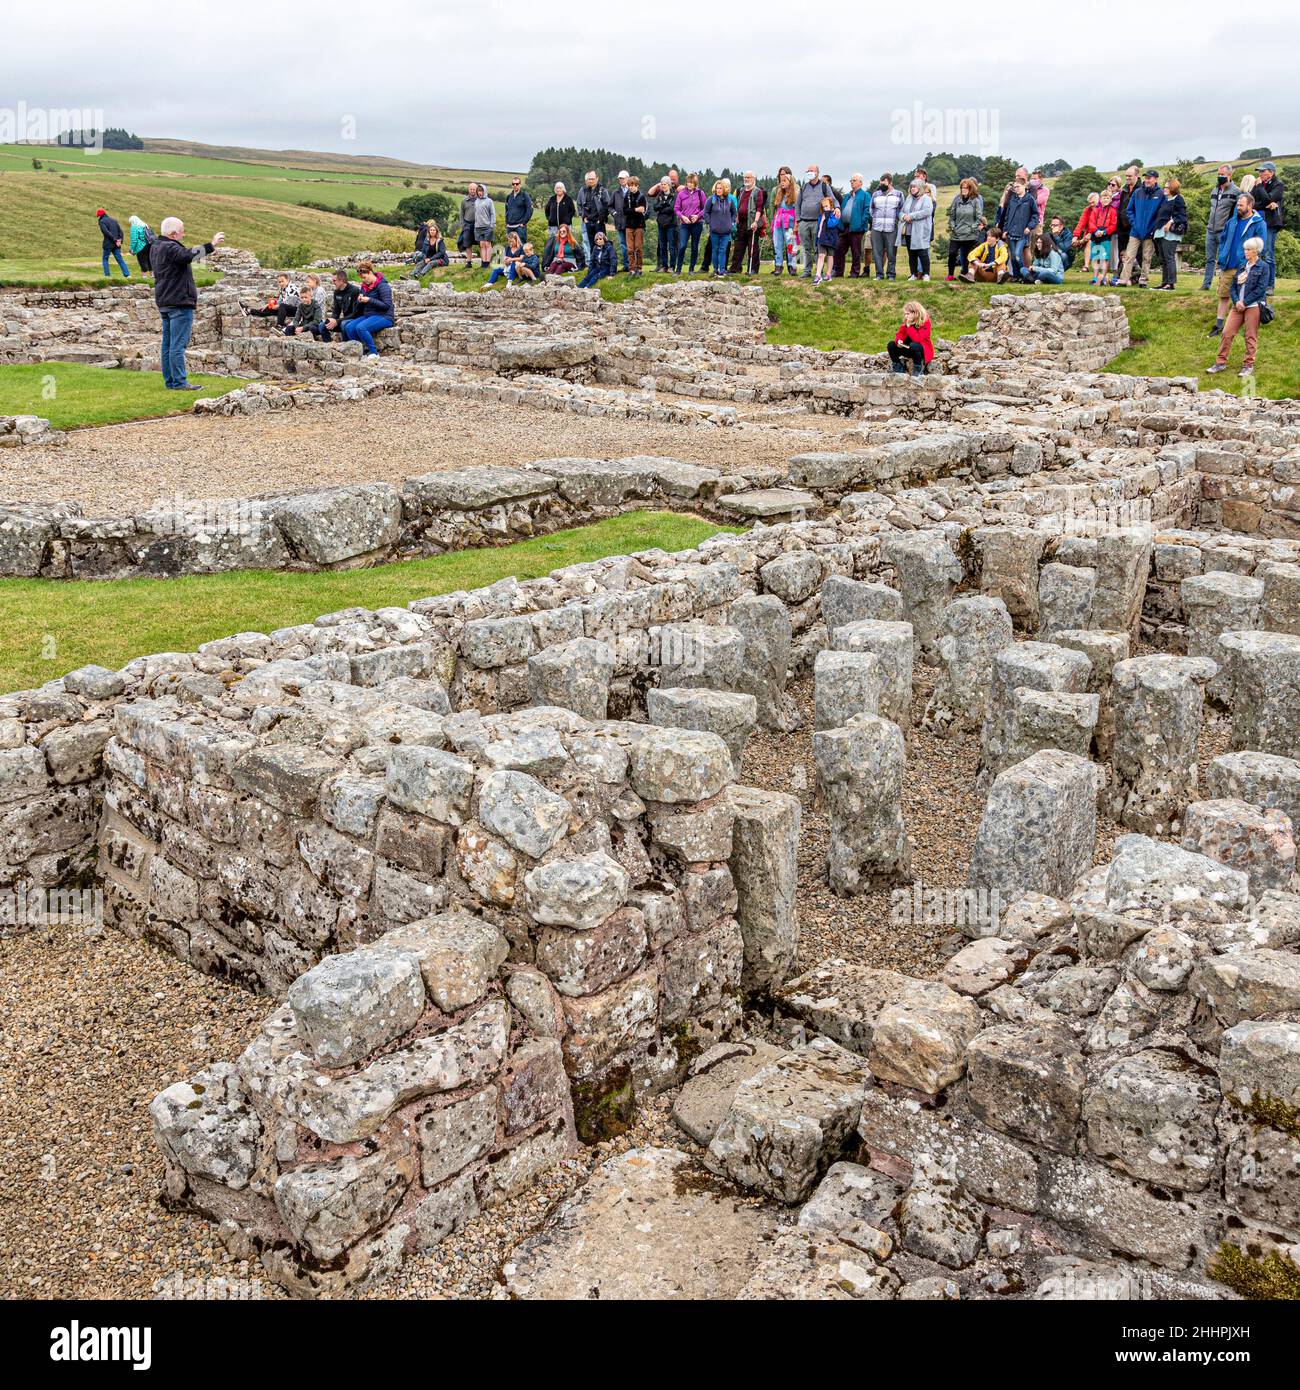 A group having a guided tour of the ruins of Vindolanda Roman auxiliary fort at Chesterholm, Northumberland UK Stock Photo